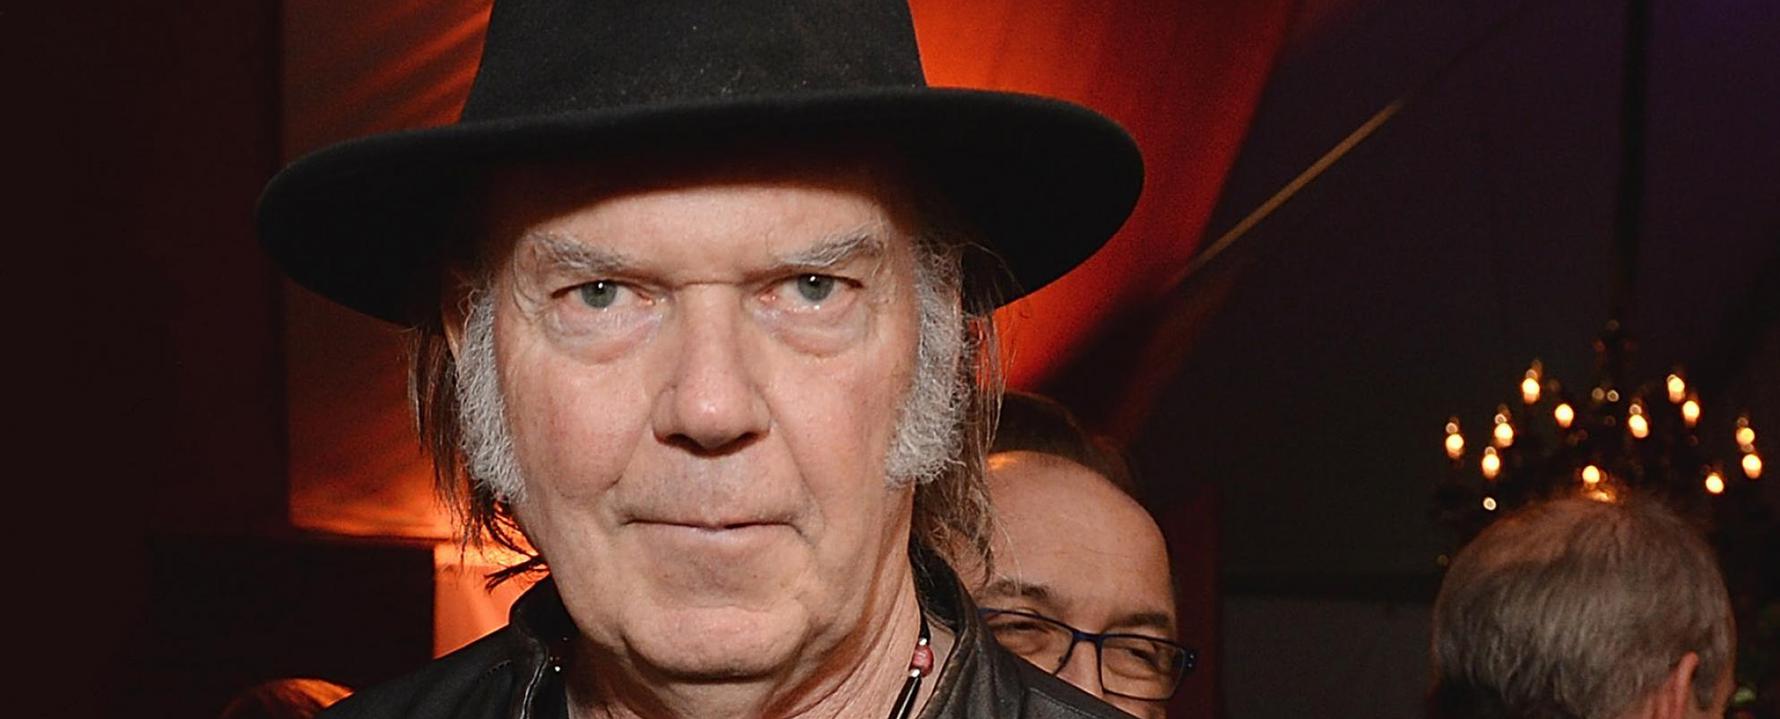 Promotional photograph of Neil Young.